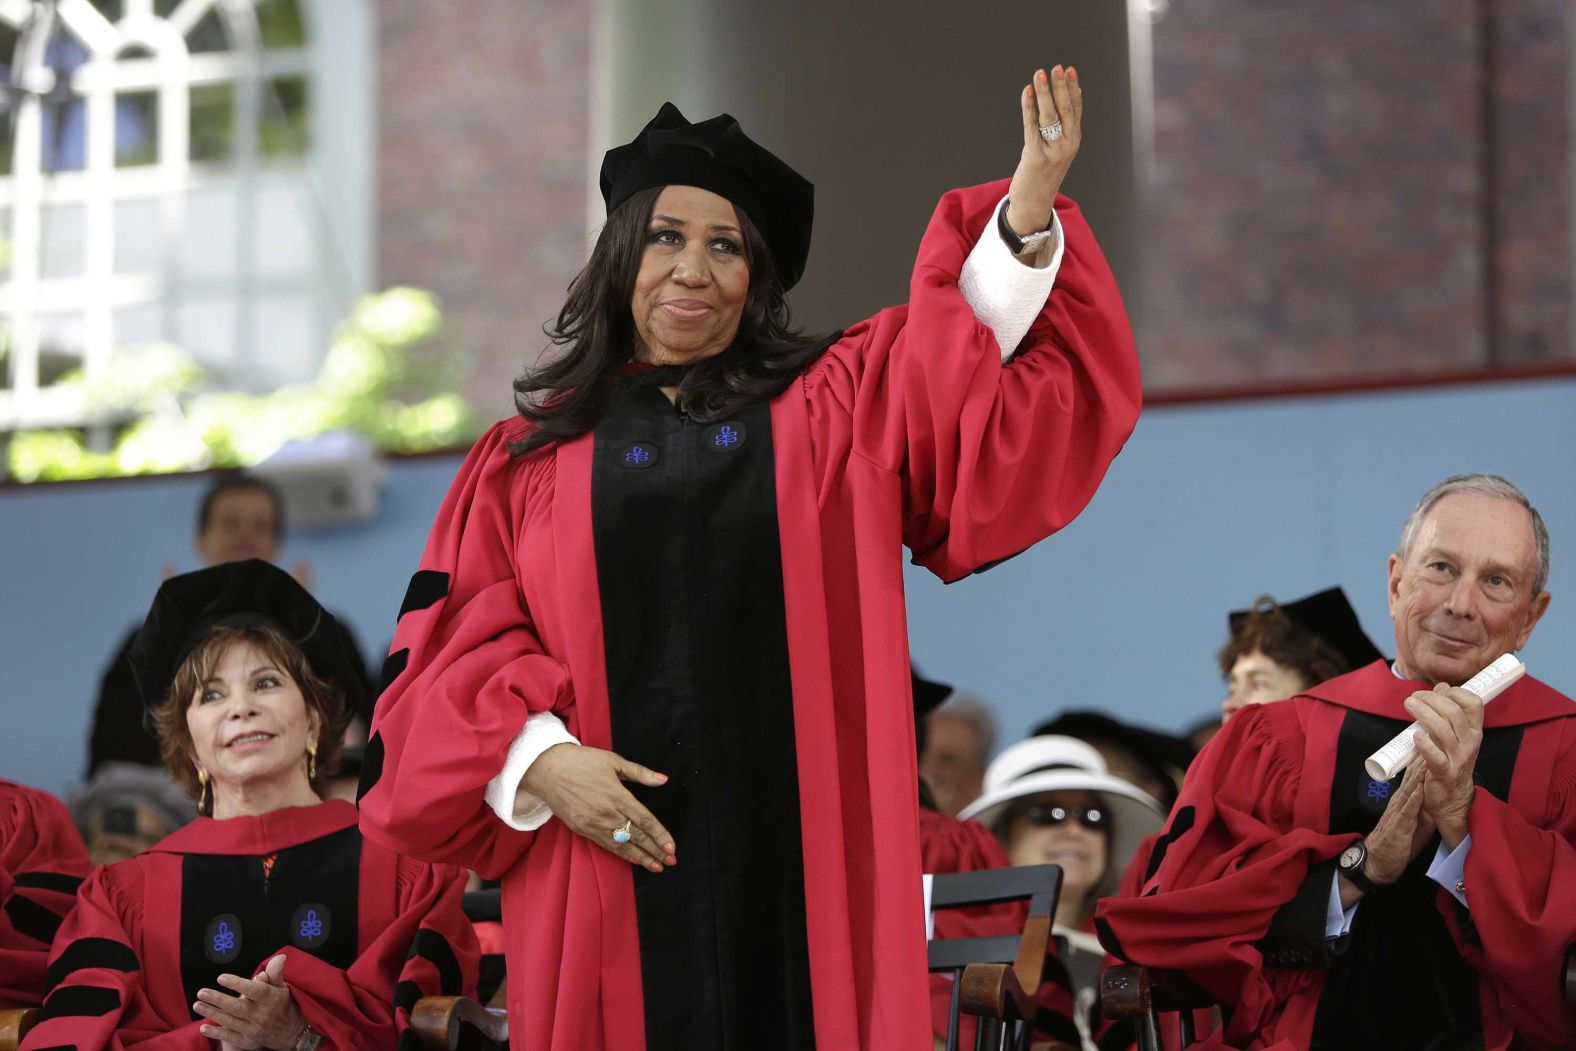 Franklin waves while standing to receive an honorary Doctor of Arts degree from Harvard University in 2014.